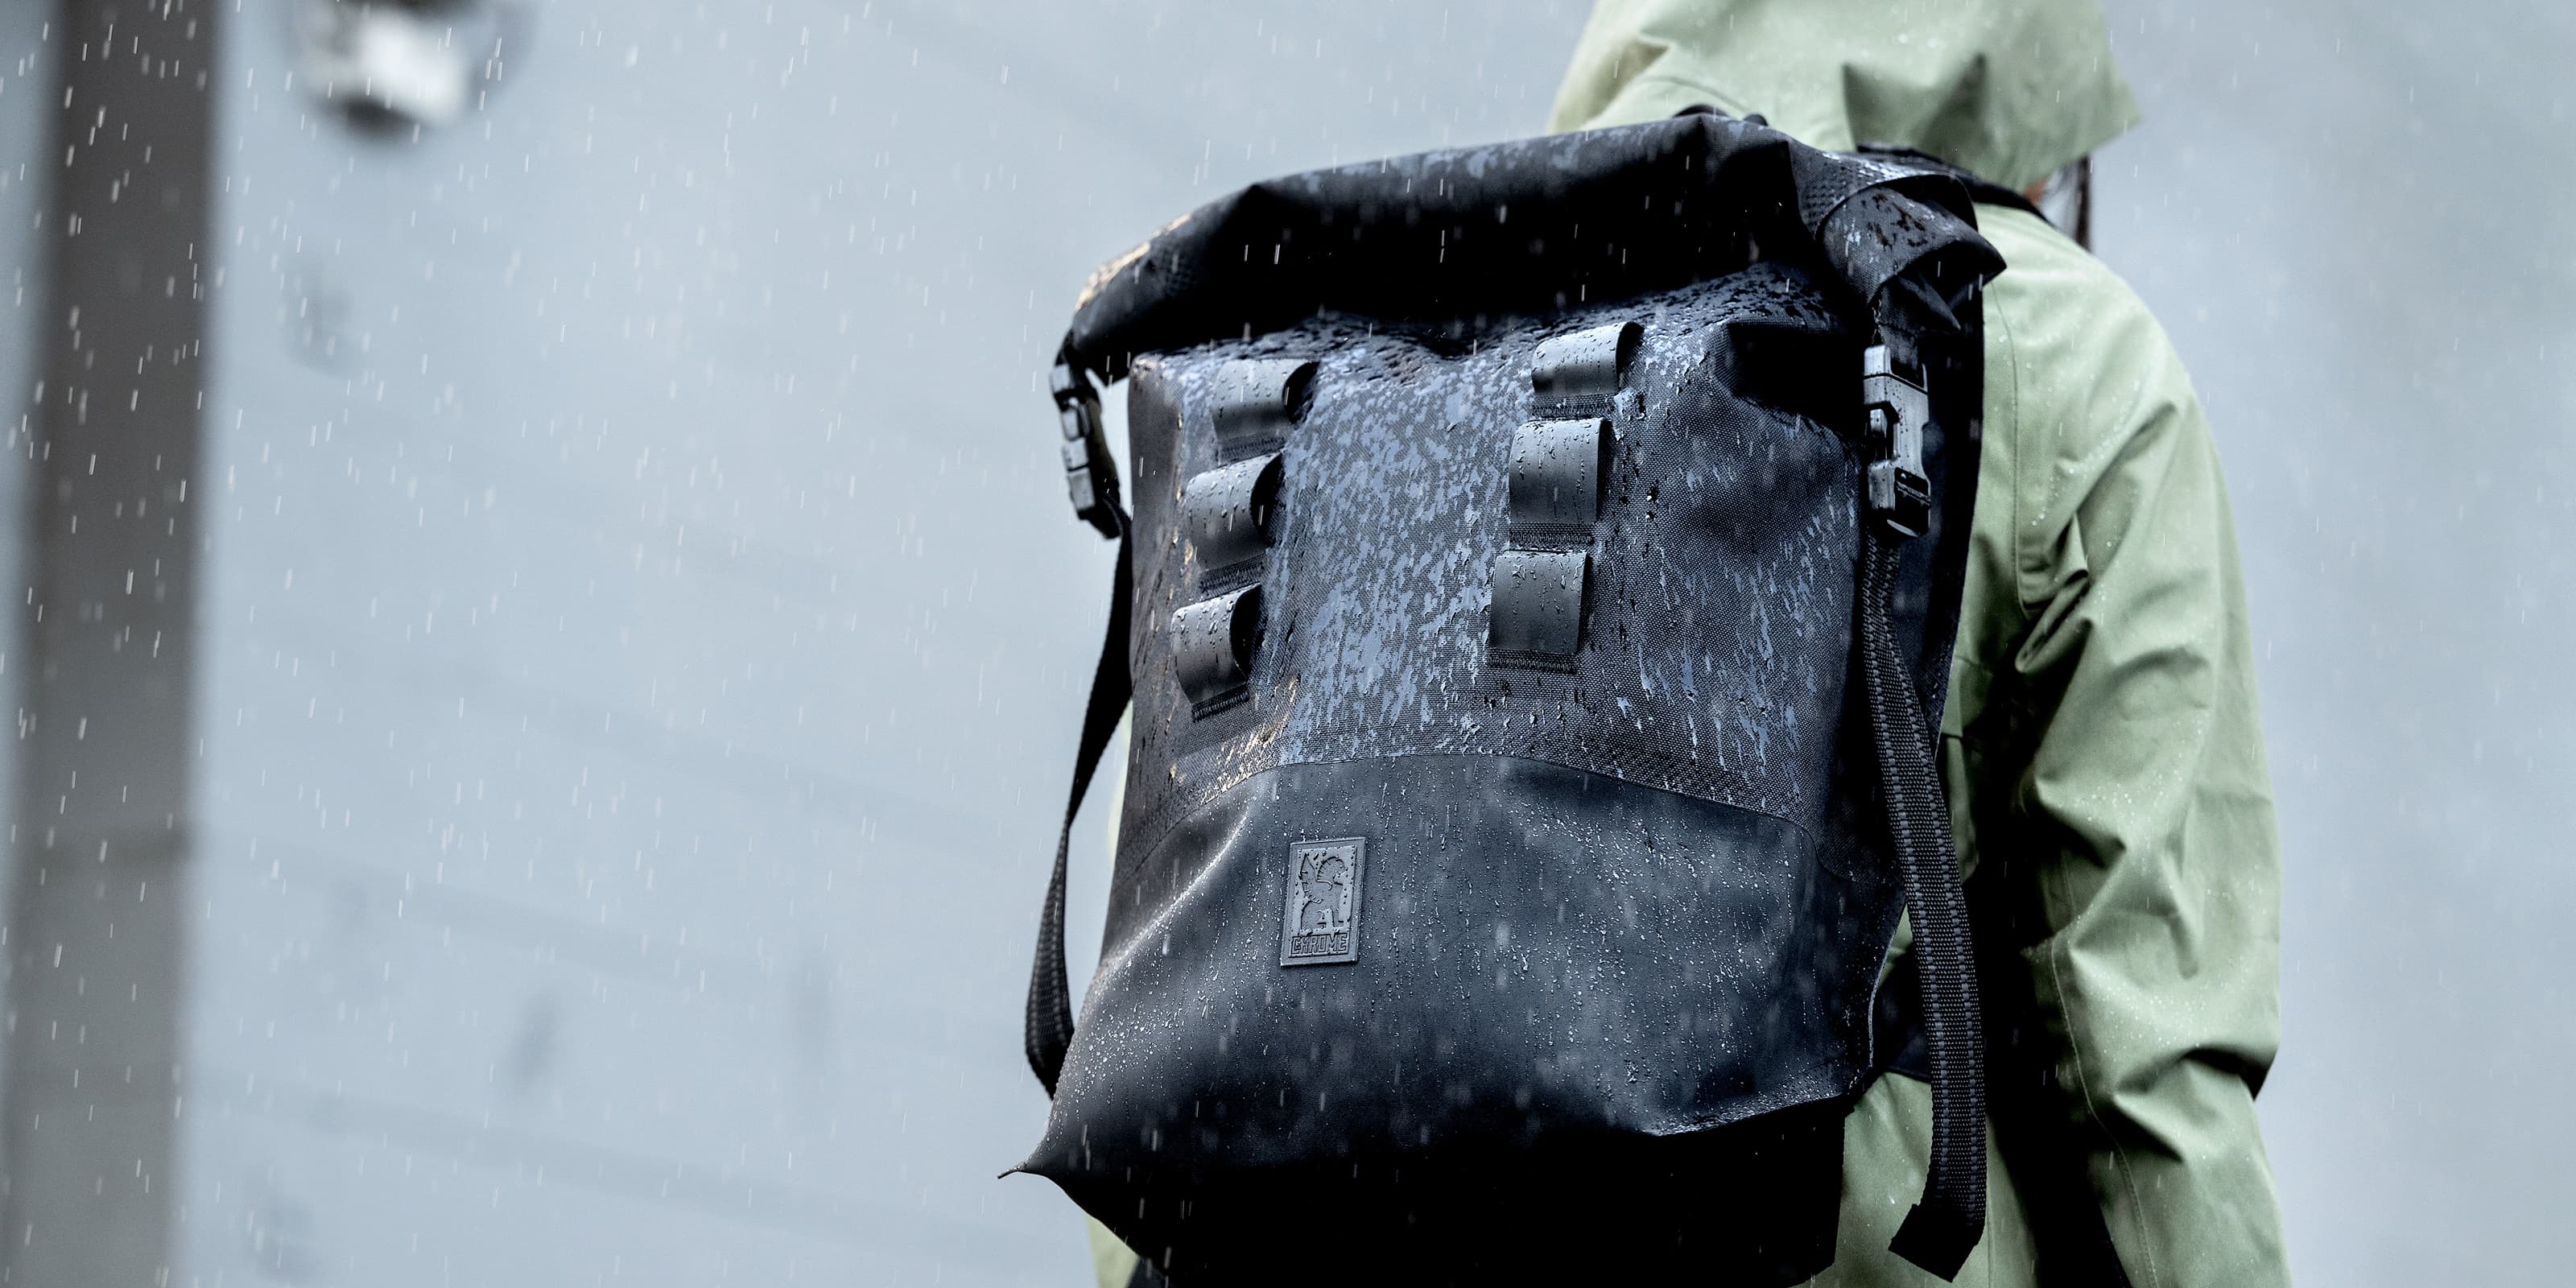 Urban Ex 20L Backpack worn by a person in the rain desktop image size